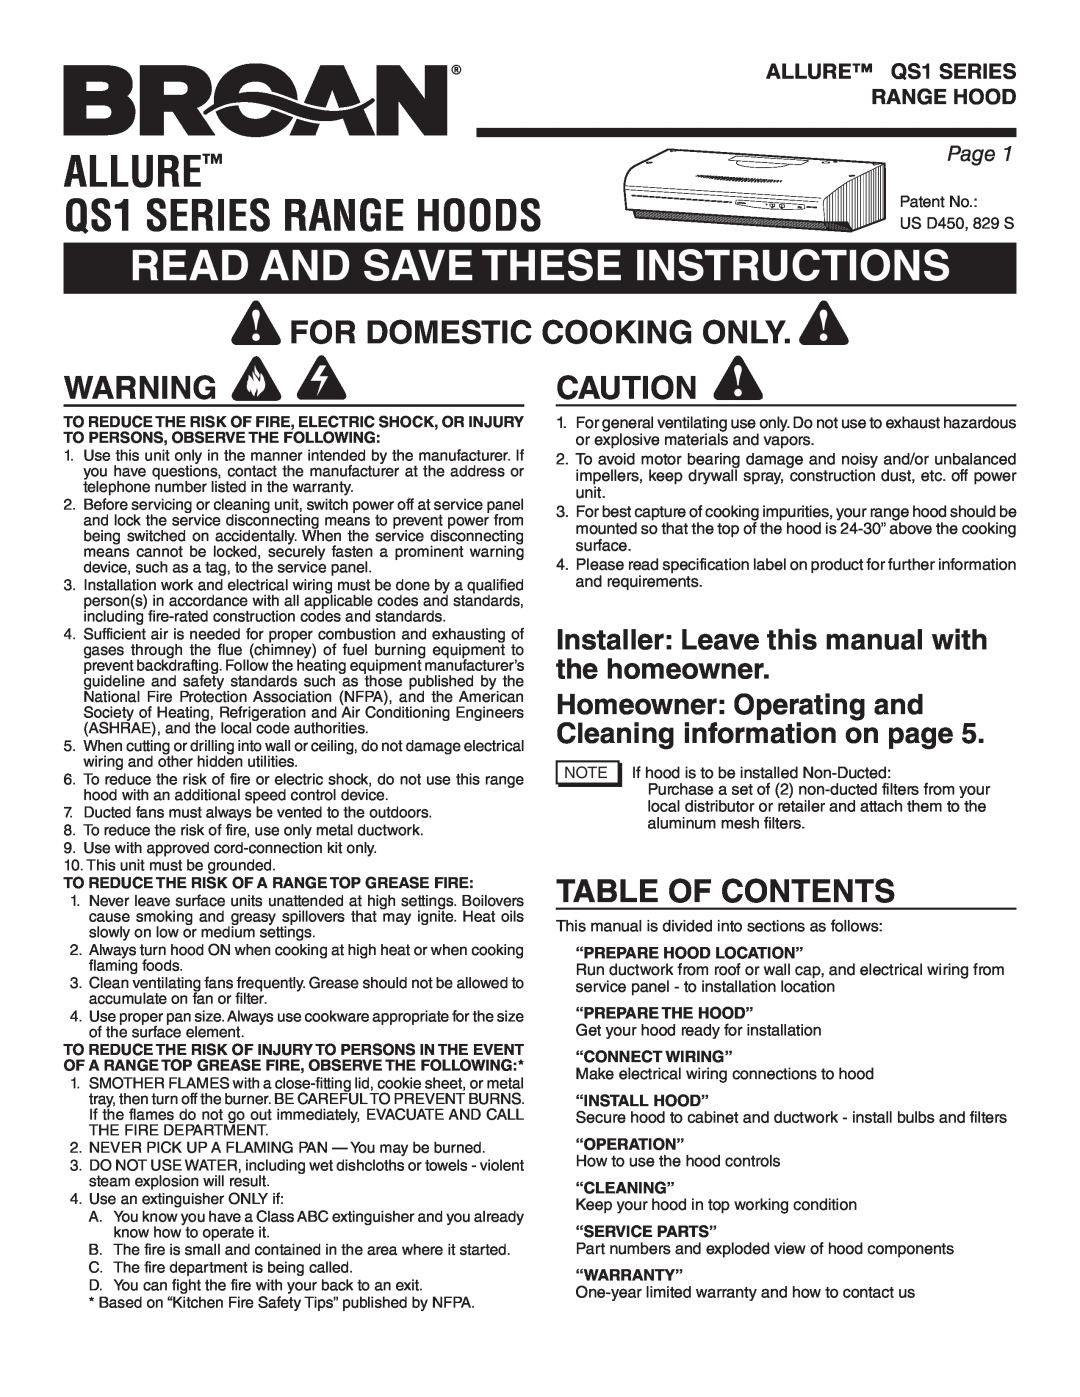 Broan QS130WW warranty Allure, QS1 SERIES RANGE HOODS, Read And Save These Instructions, For Domestic Cooking Only, Page 